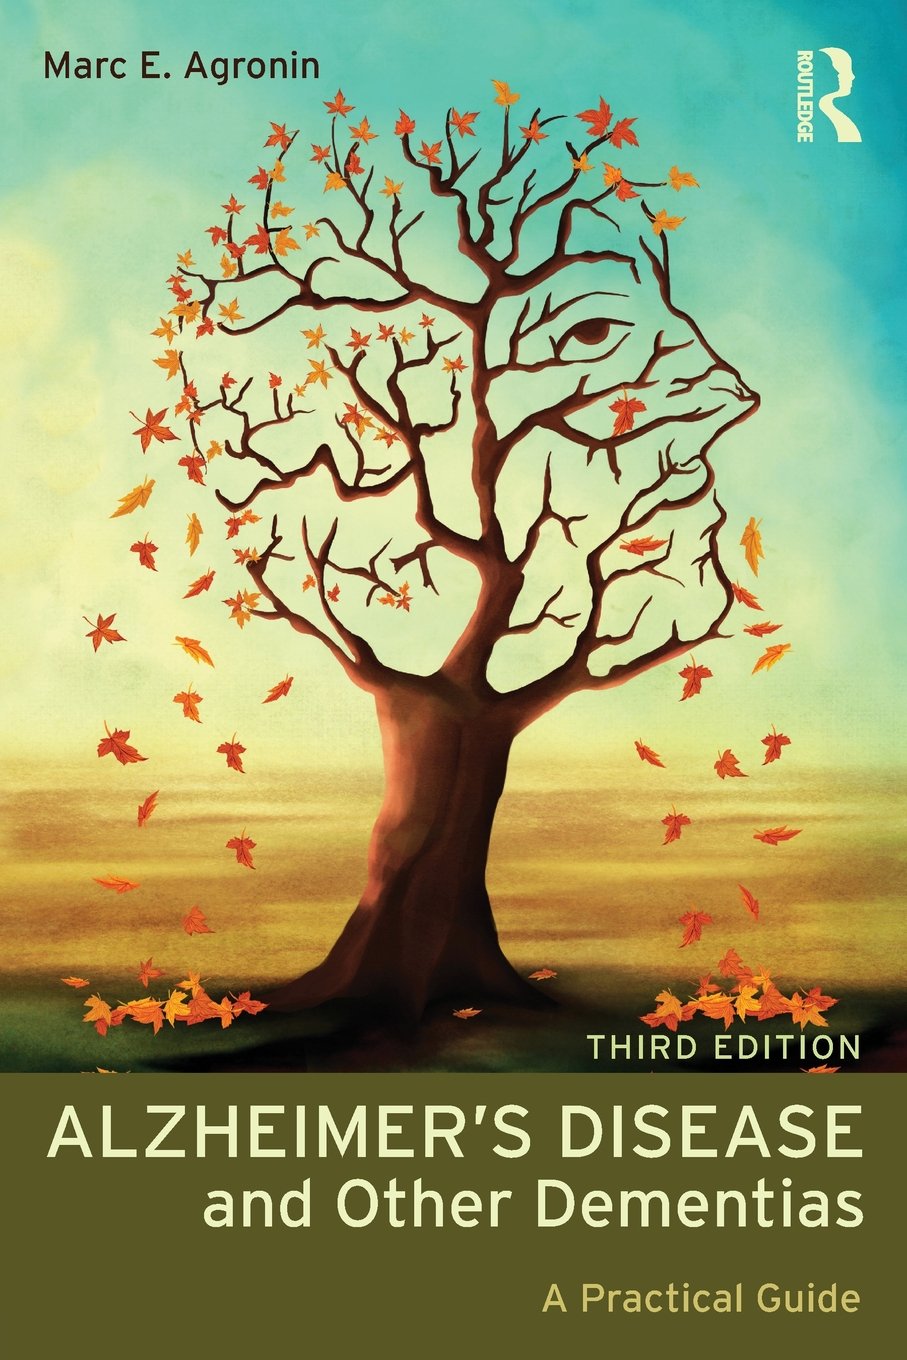 Marc E. Agronin, MDAlzheimer’s Disease and Other Dementias, A Practical Guide, 3rd Edition